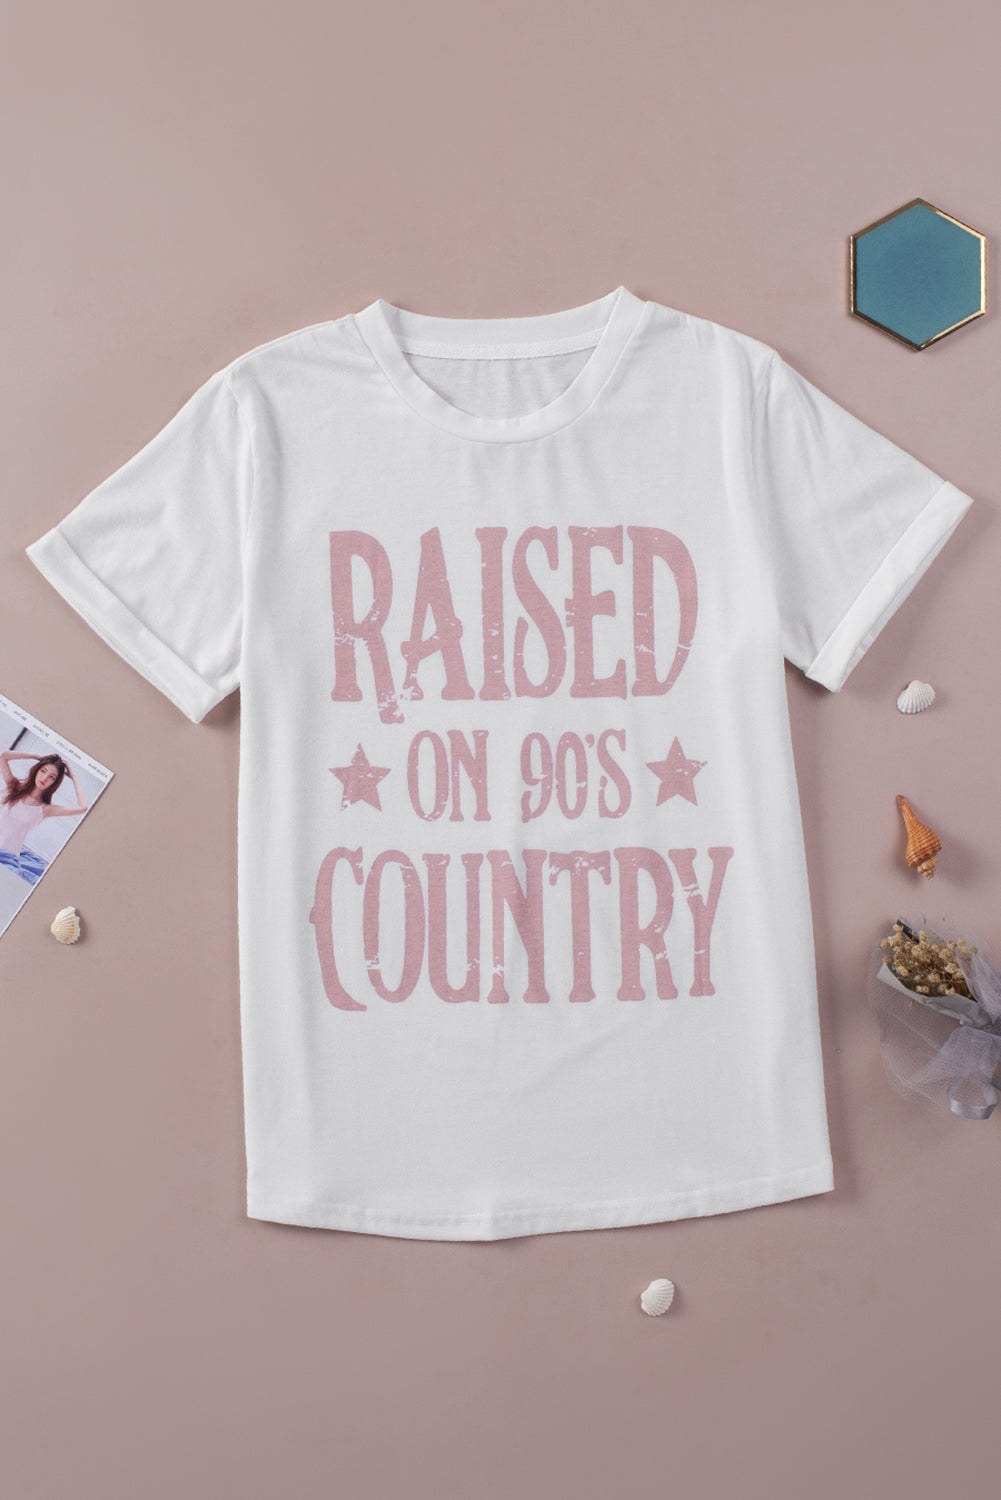 RAISED ON 90'S COUNTRY Graphic Round Neck Tee - Cheeky Chic Boutique